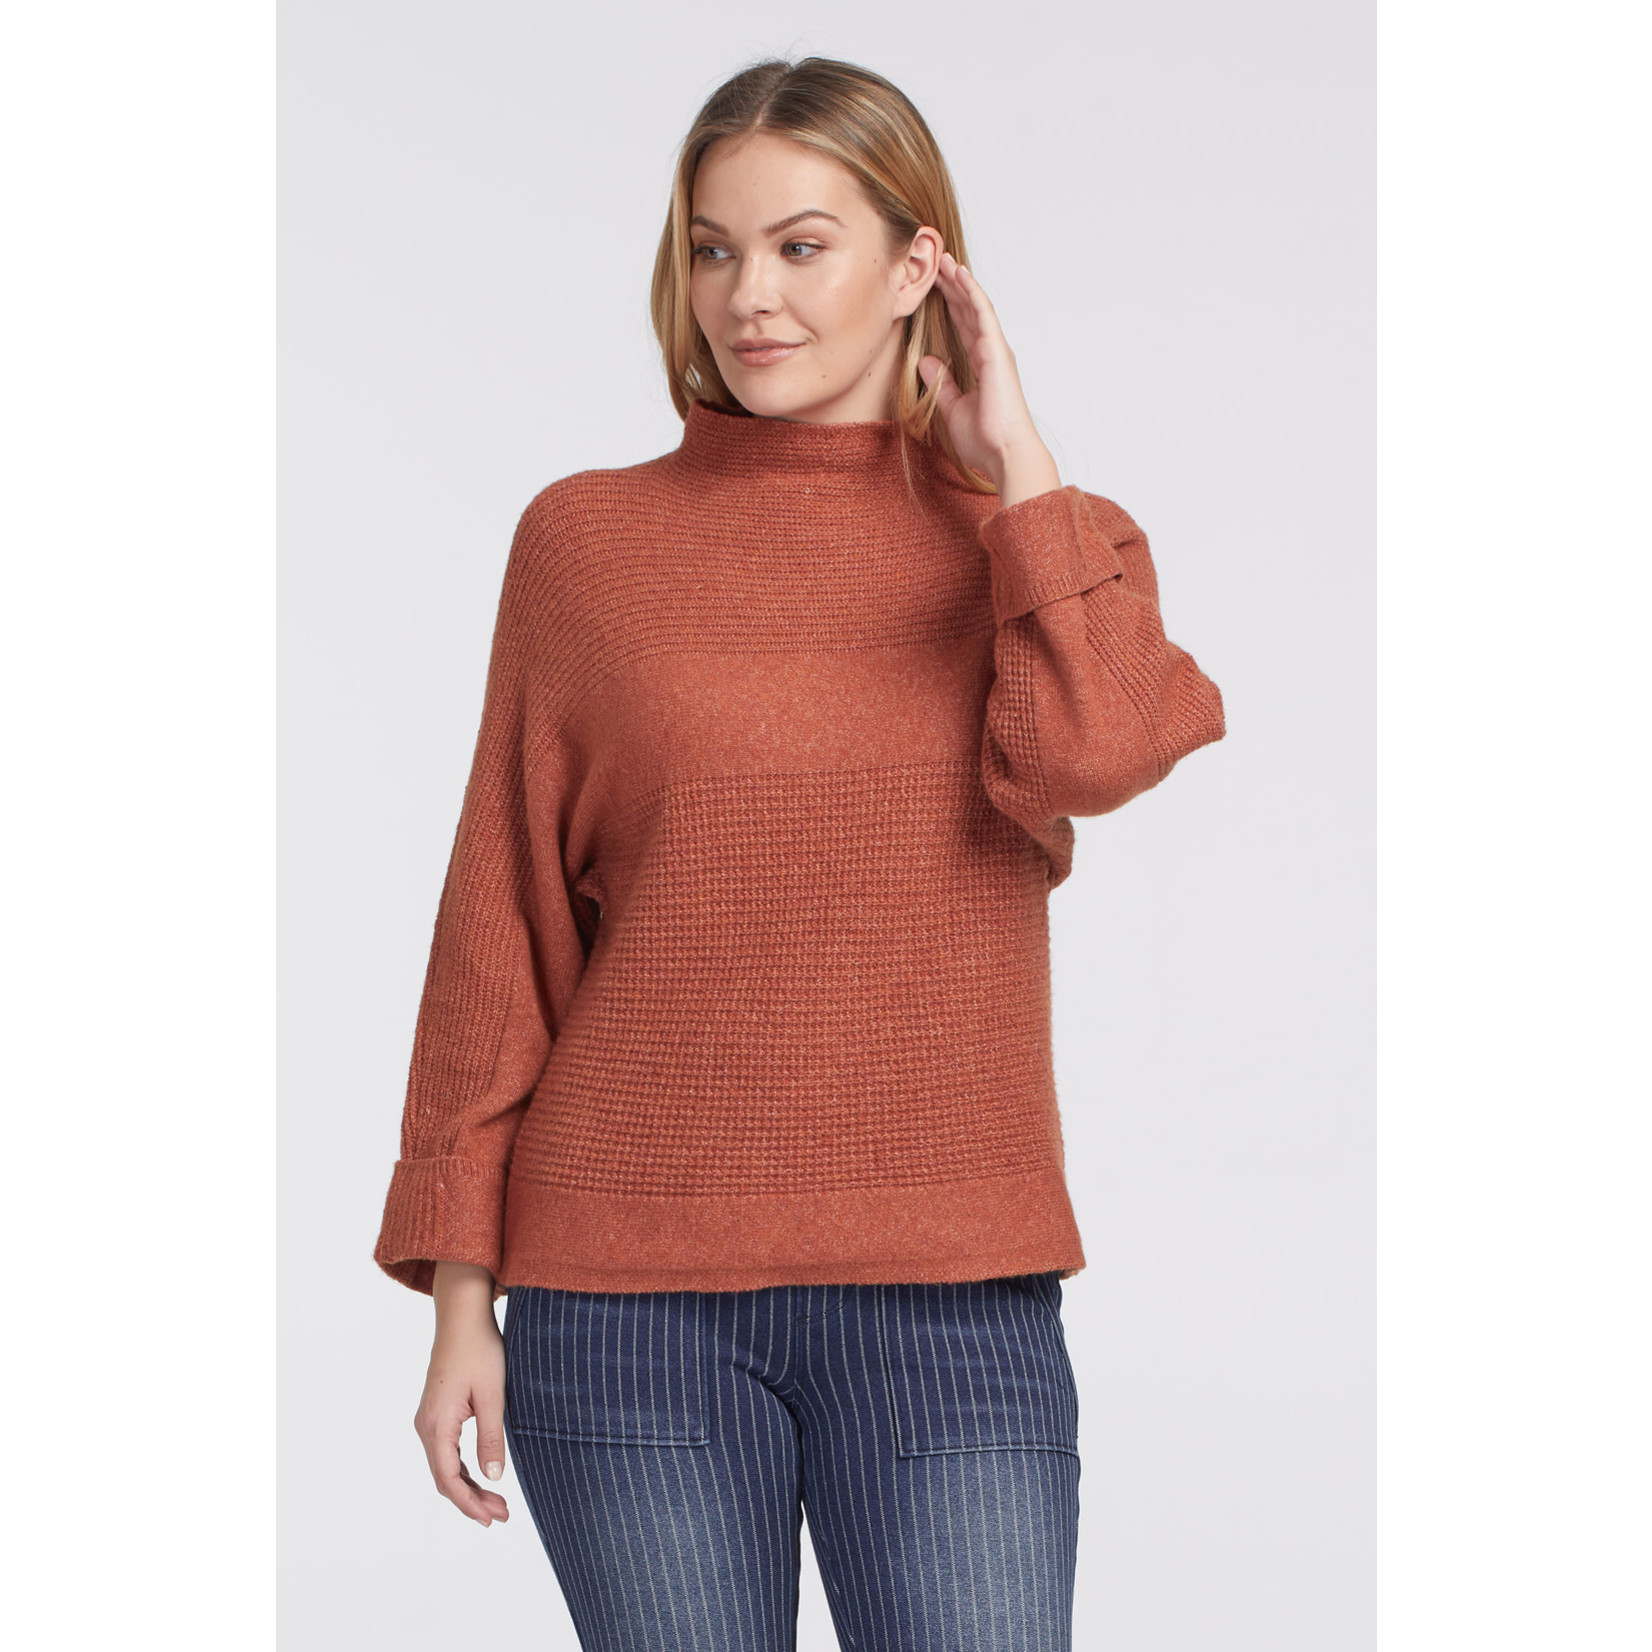 Tribal Funnel Neck Sweater (More Colors)